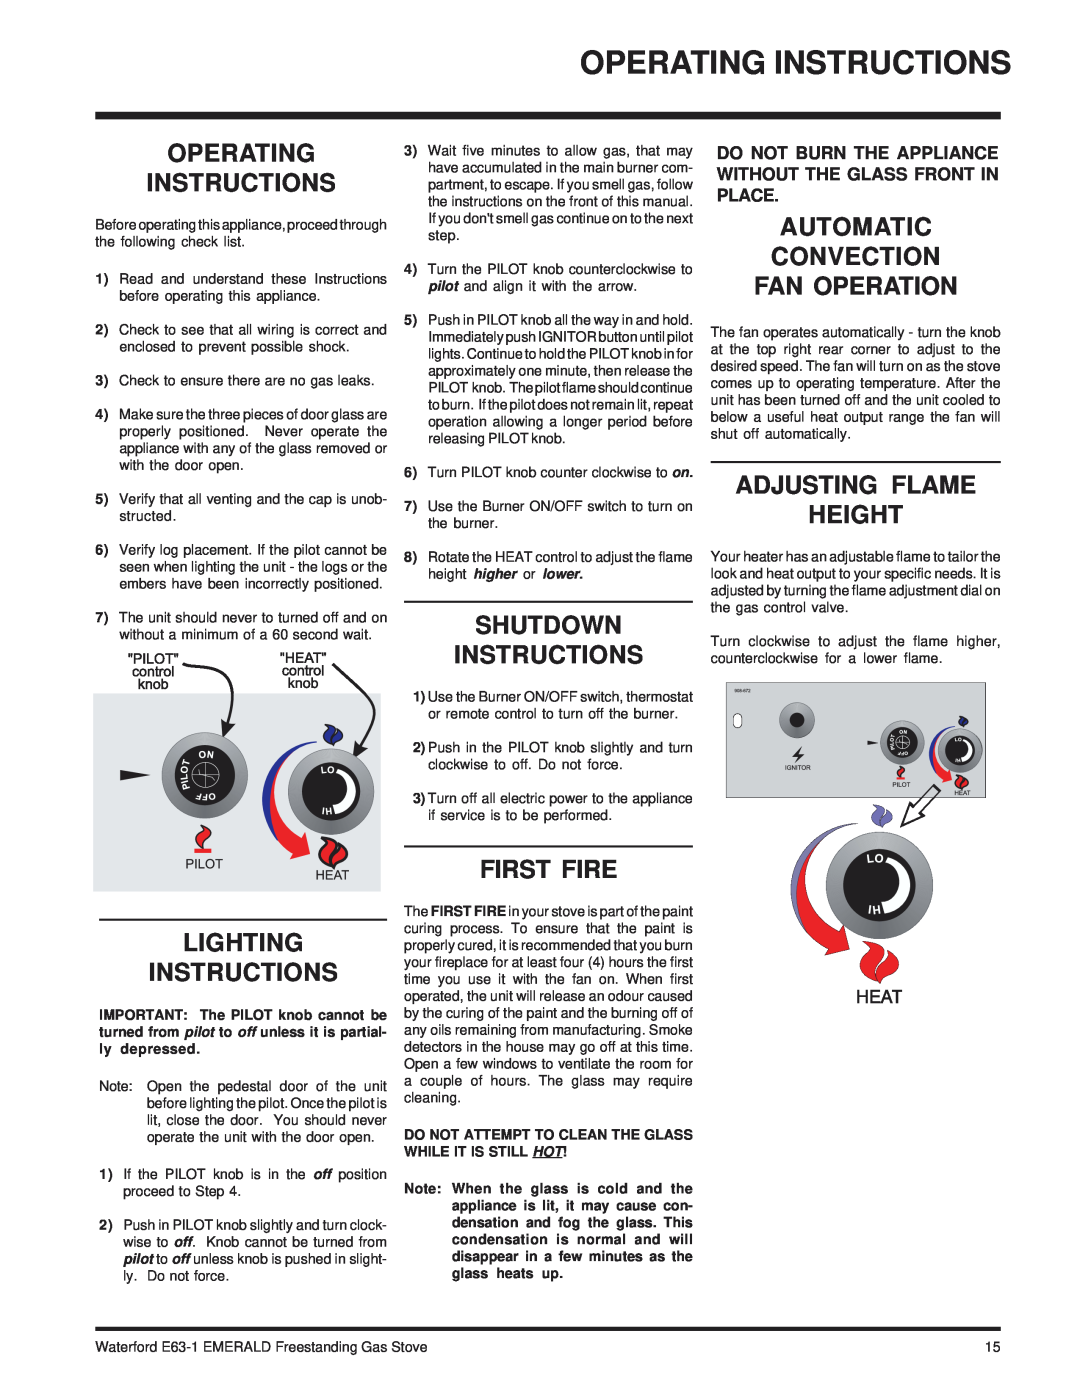 Waterford Appliances E63-NG1 Operating Instructions, Shutdown Instructions, Automatic Convection Fan Operation, First Fire 